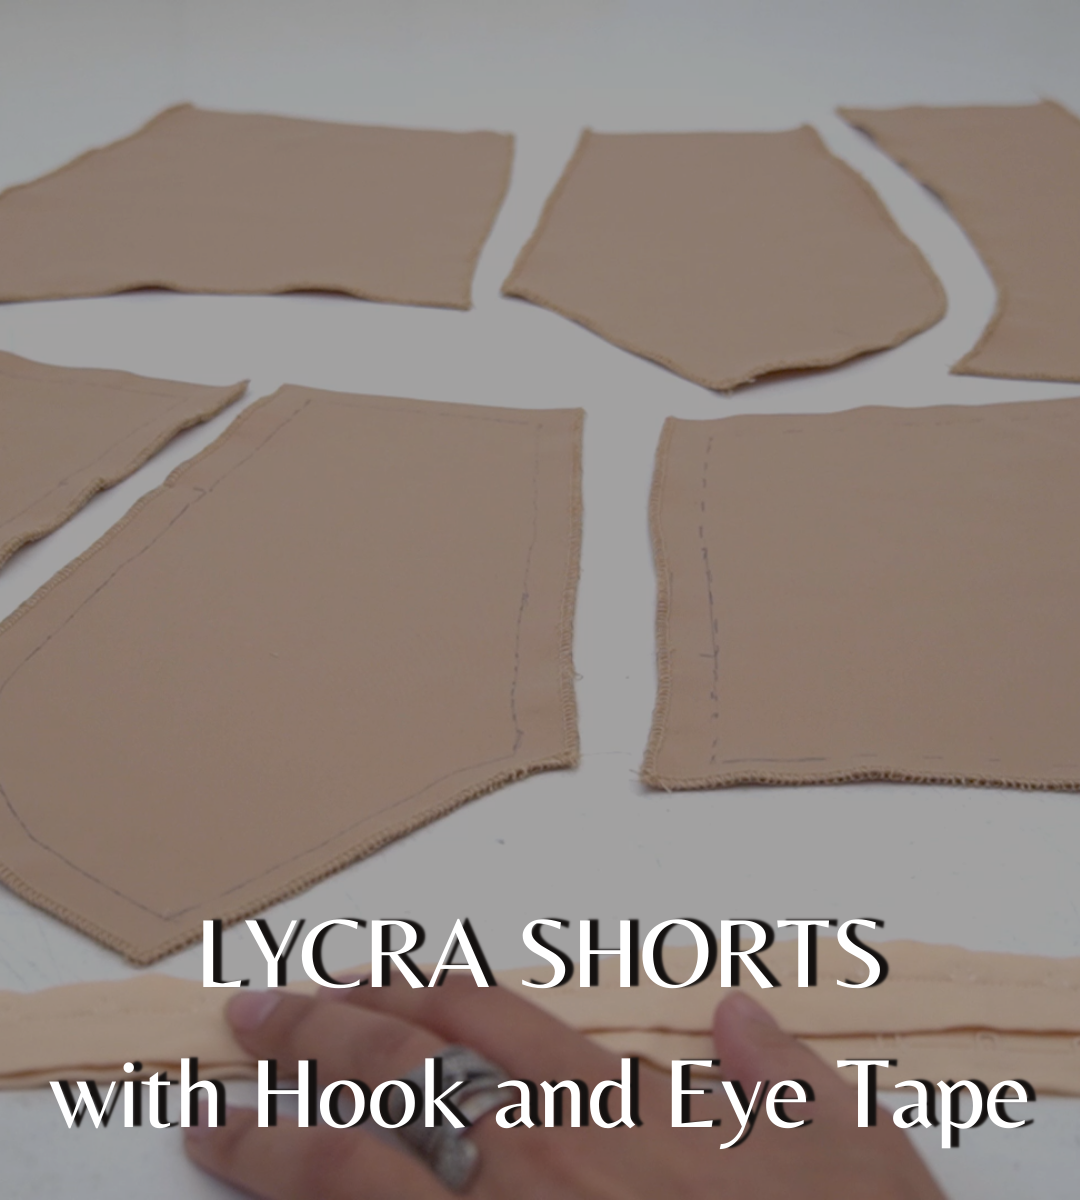 LYCRA SHORTS with Hook and Eye Tape Master Course